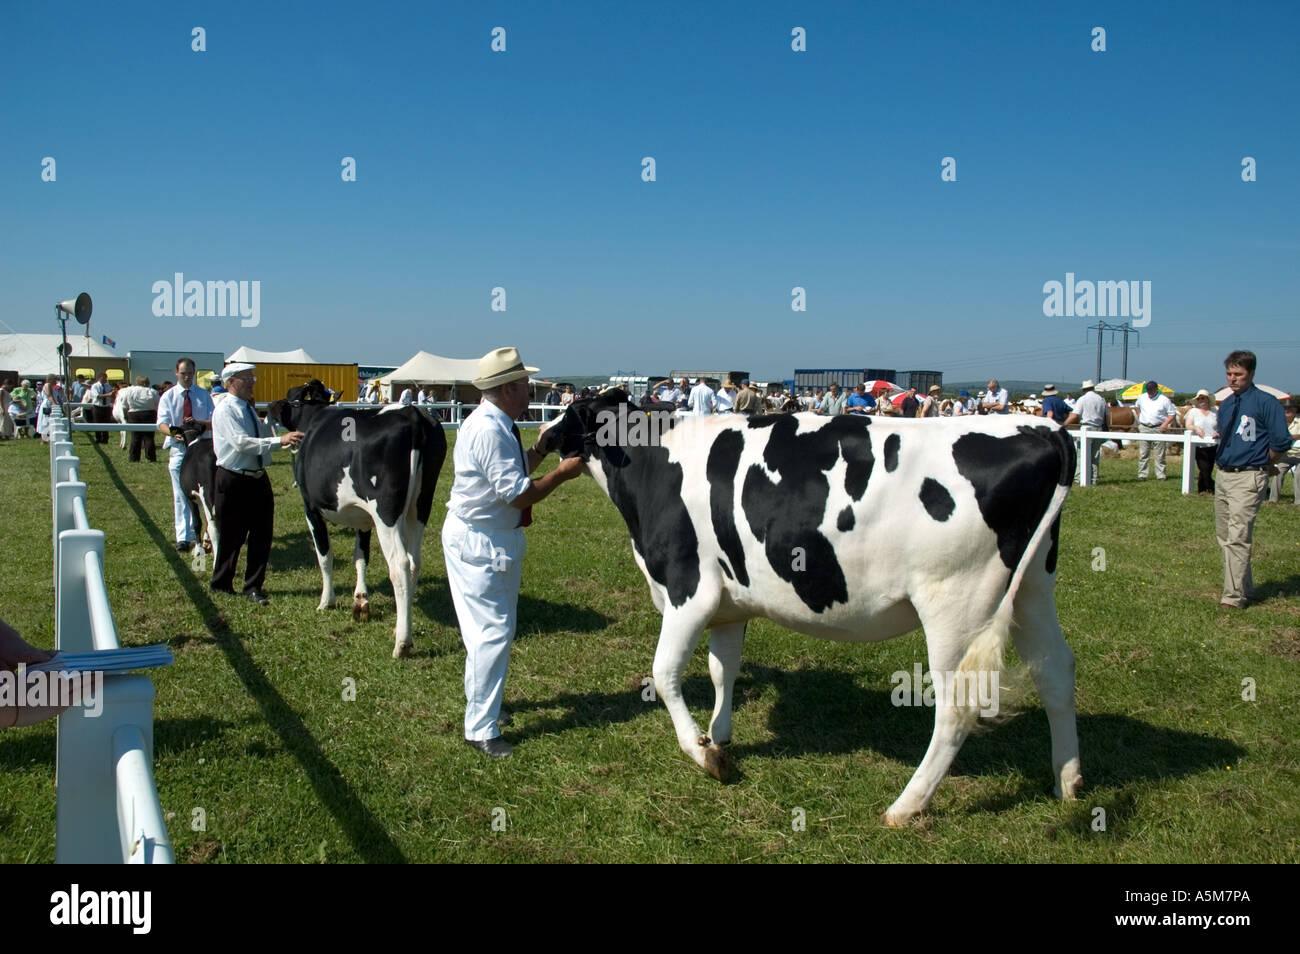 friesian cows being judged at stithians agricultrural show in cornwall,england Stock Photo